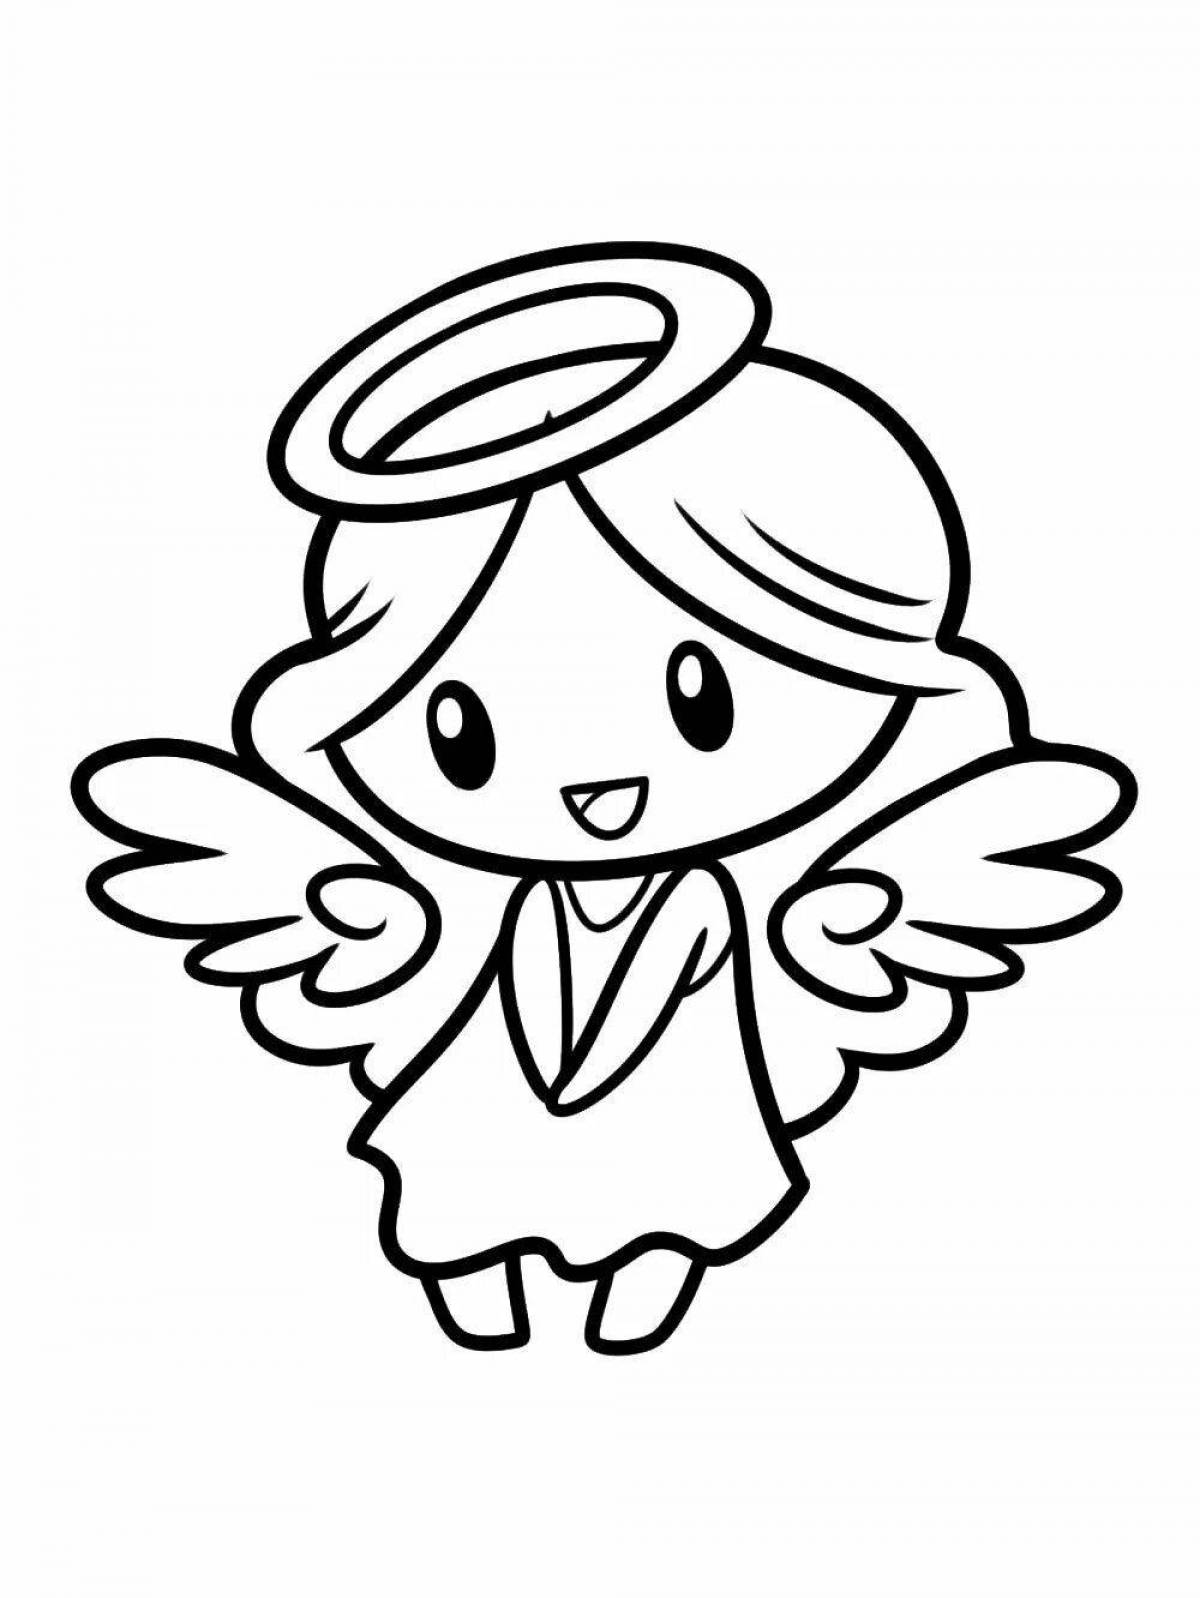 Coloring book angel for children 3-4 years old